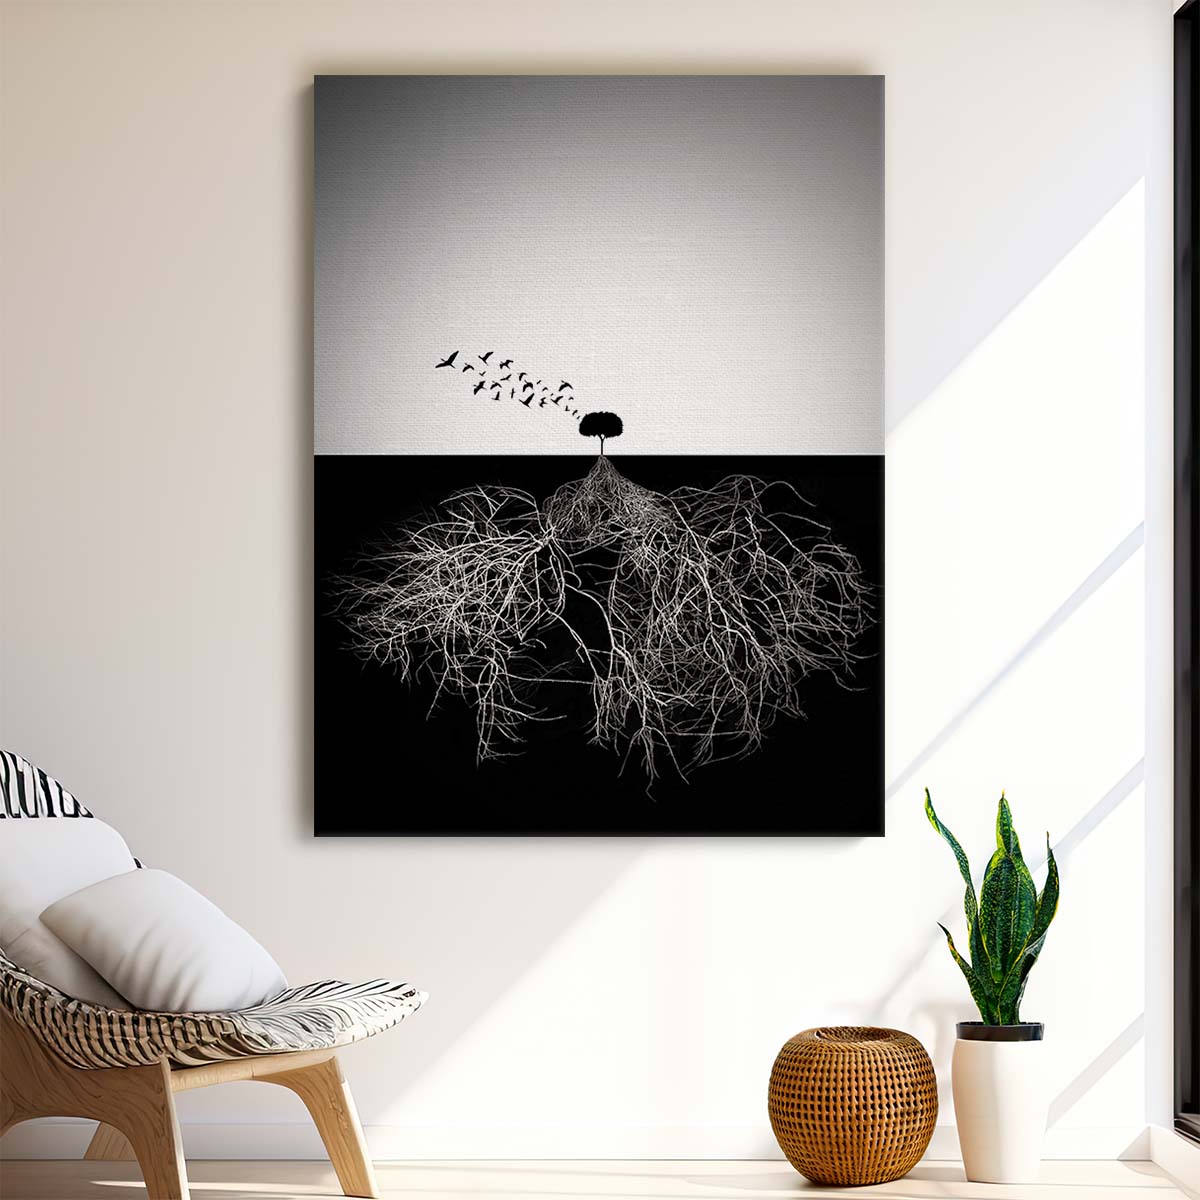 Surrealist Black & White Tree Roots Birds Photo Montage Artwork by Luxuriance Designs, made in USA